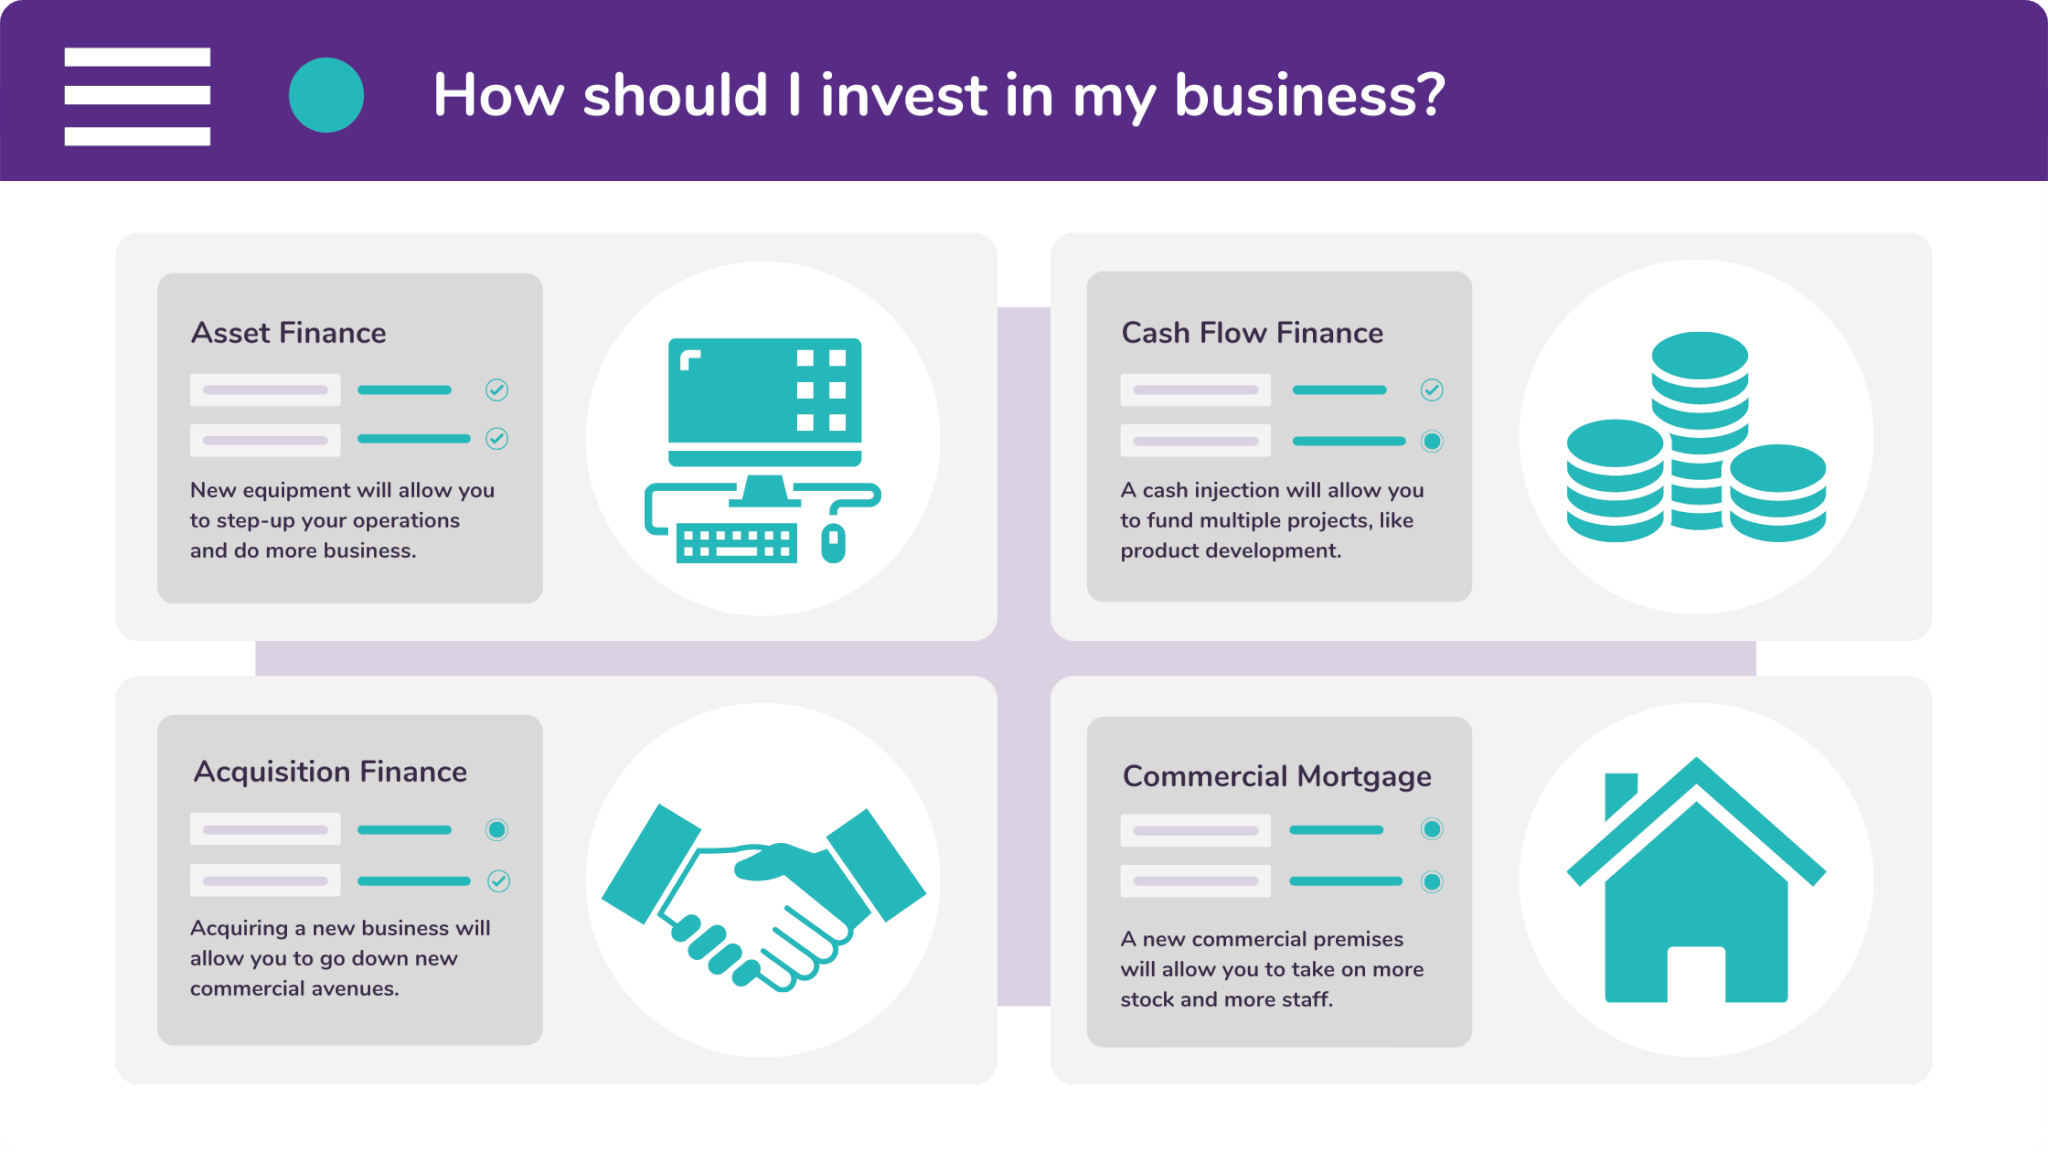 There are four types of business finance which you should consider when investing in your business.